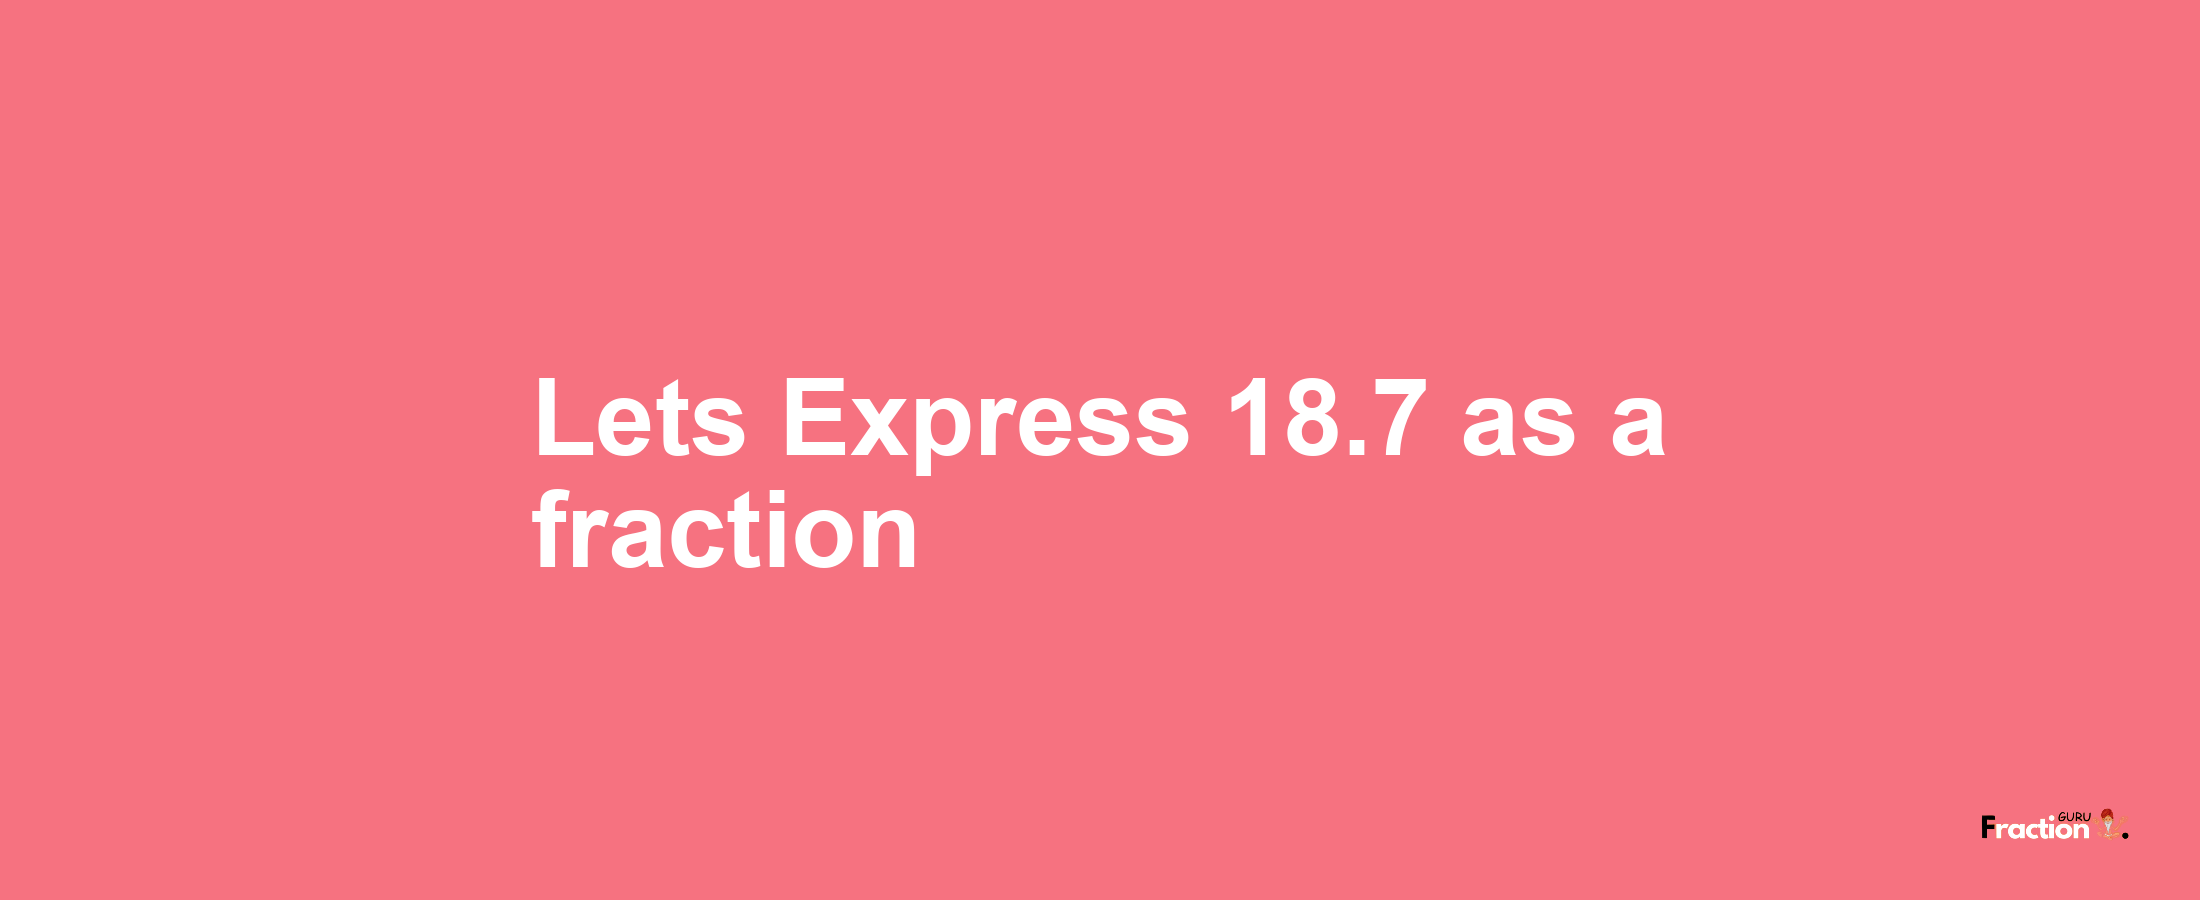 Lets Express 18.7 as afraction